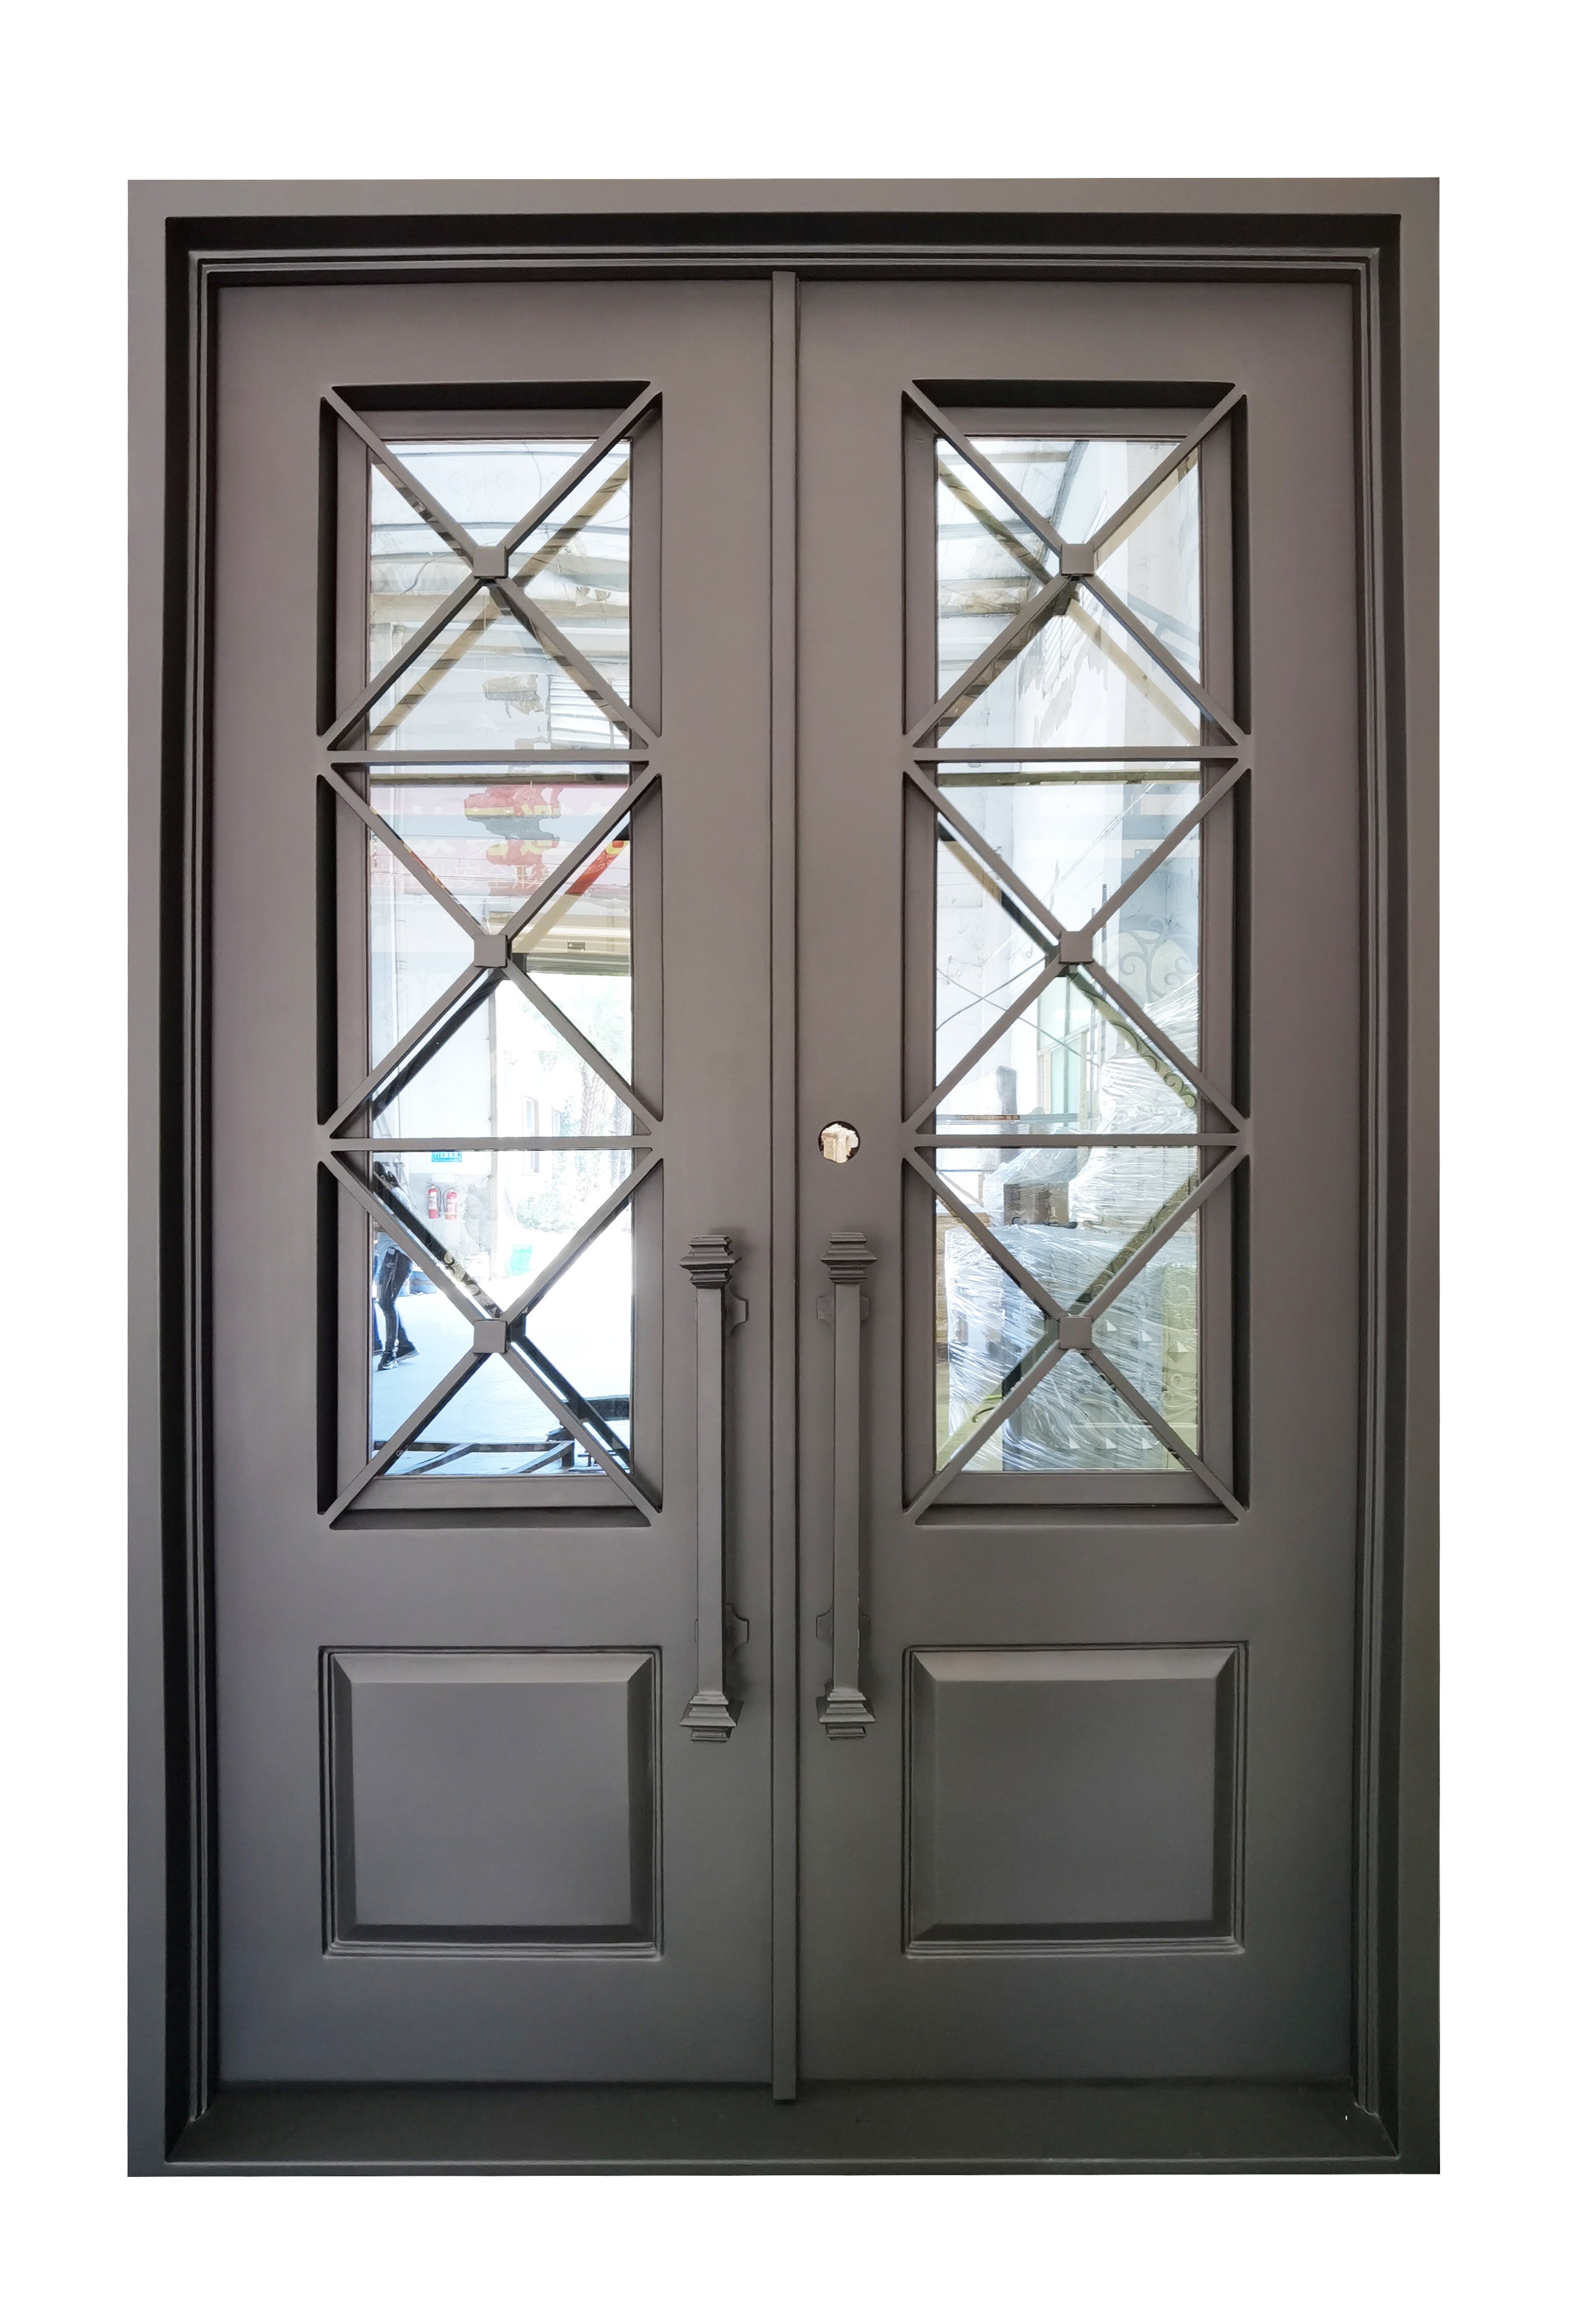 Rockport Model Double Front Entry Iron Door With Tempered Reflective Glass Matt Black Finish